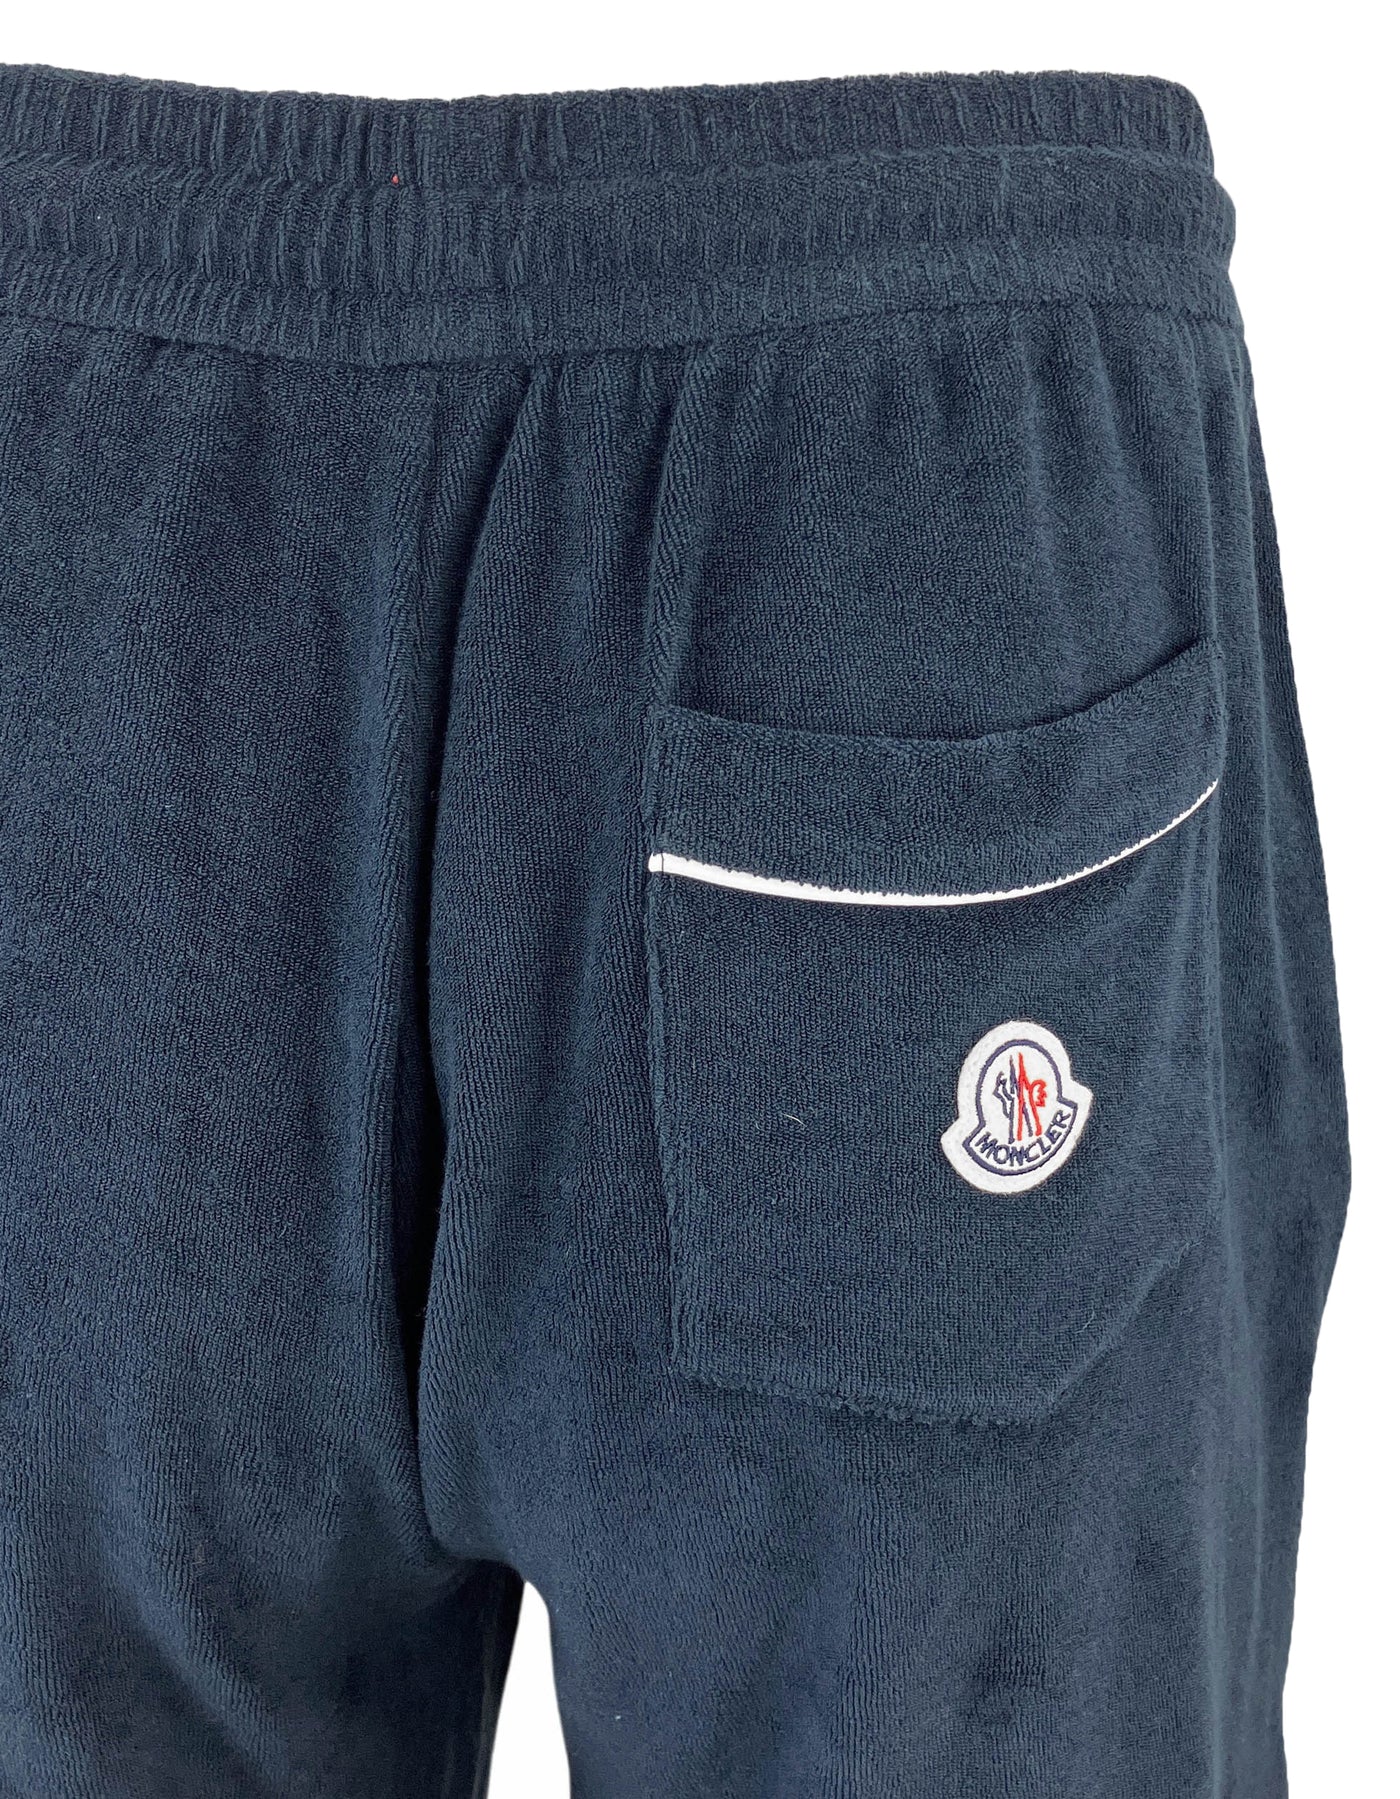 Moncler Terry Cloth Shorts in Navy - Discounts on Moncler at UAL